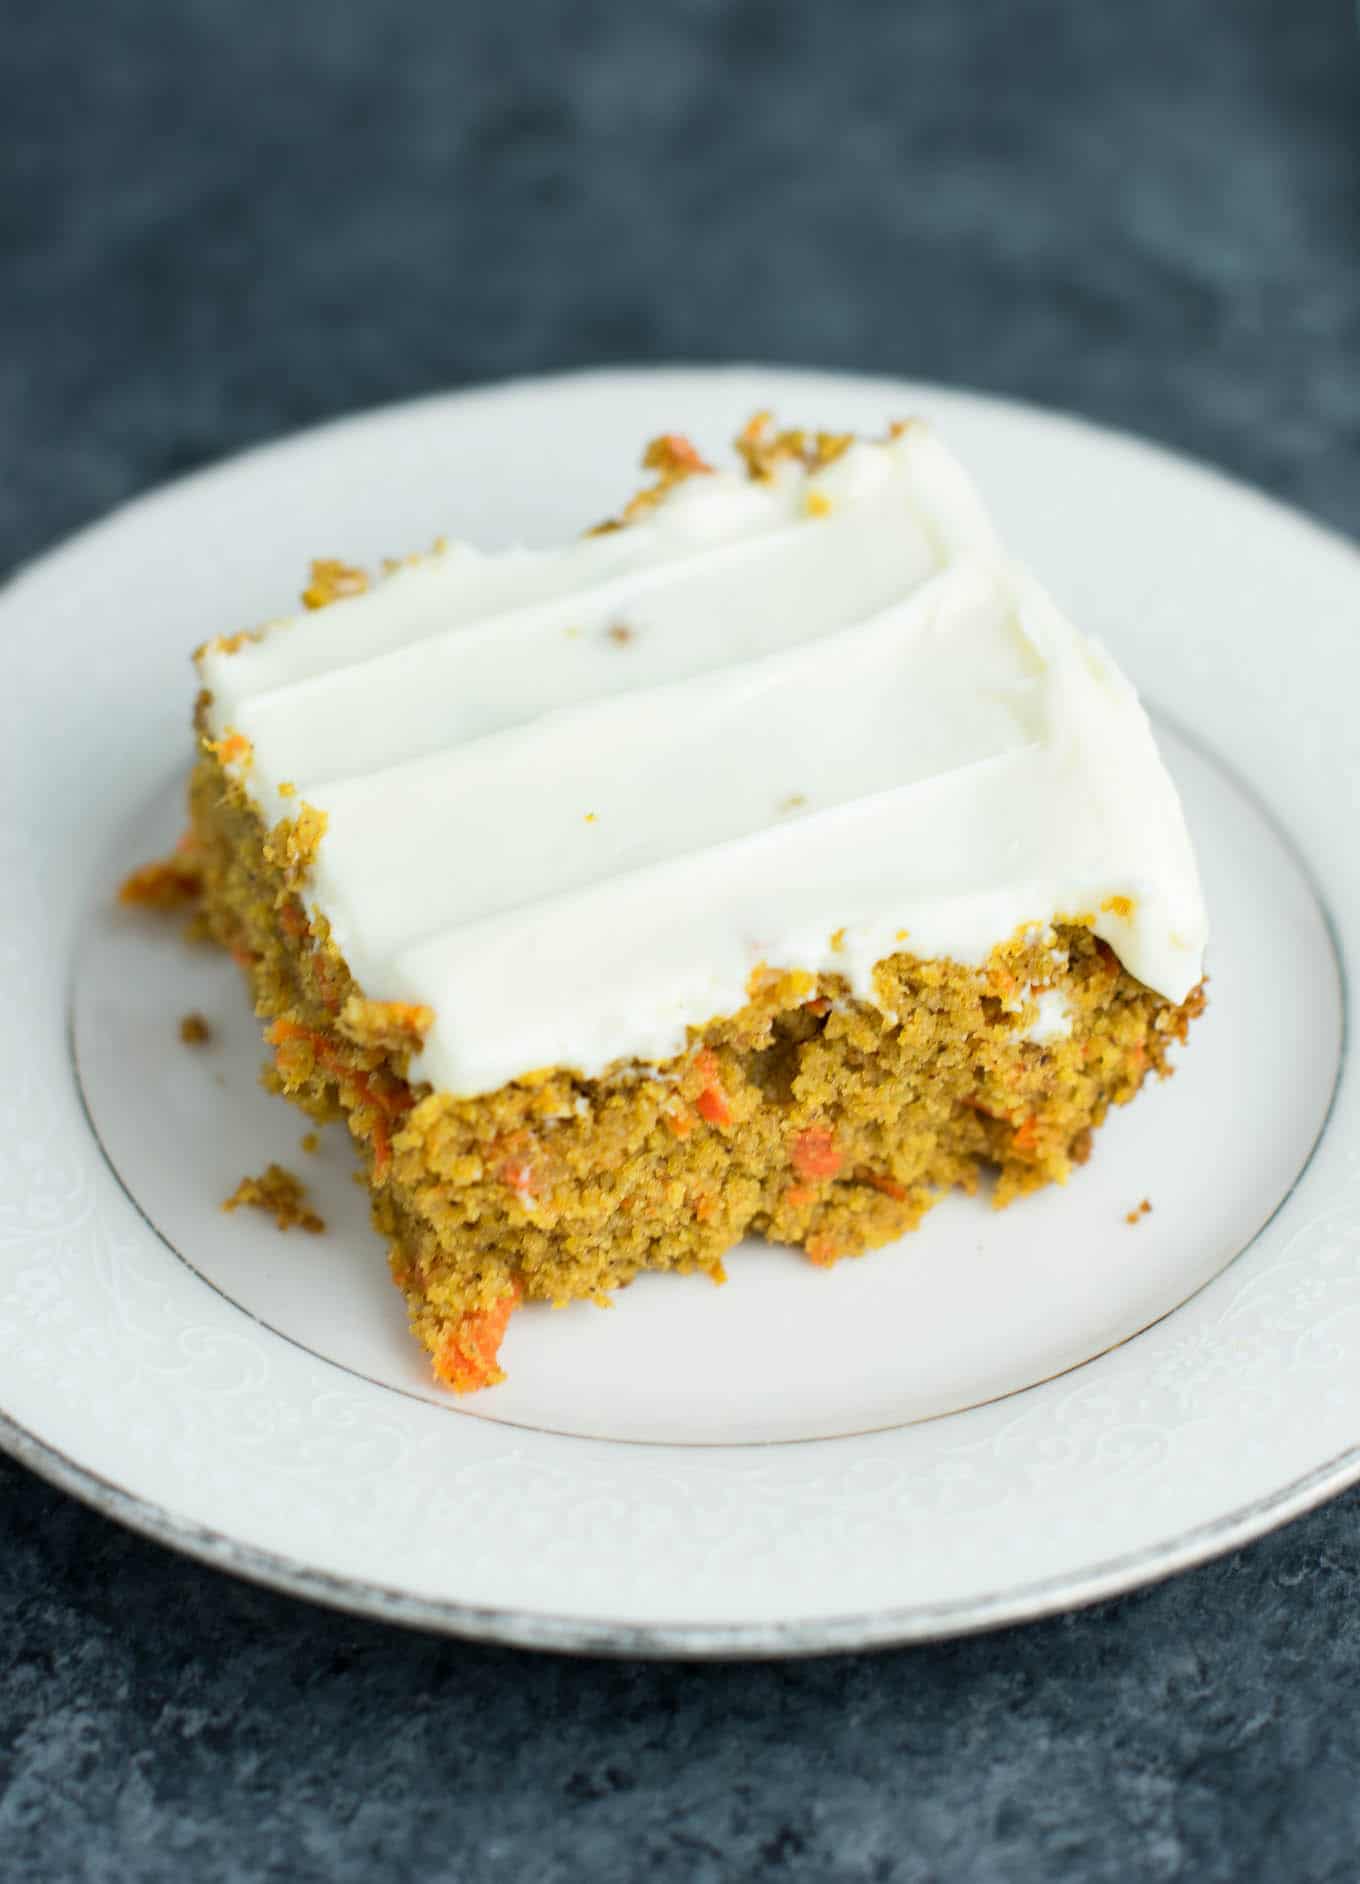 Healthy Gluten Free Carrot Cake Recipe Easy Recipes To Make At Home